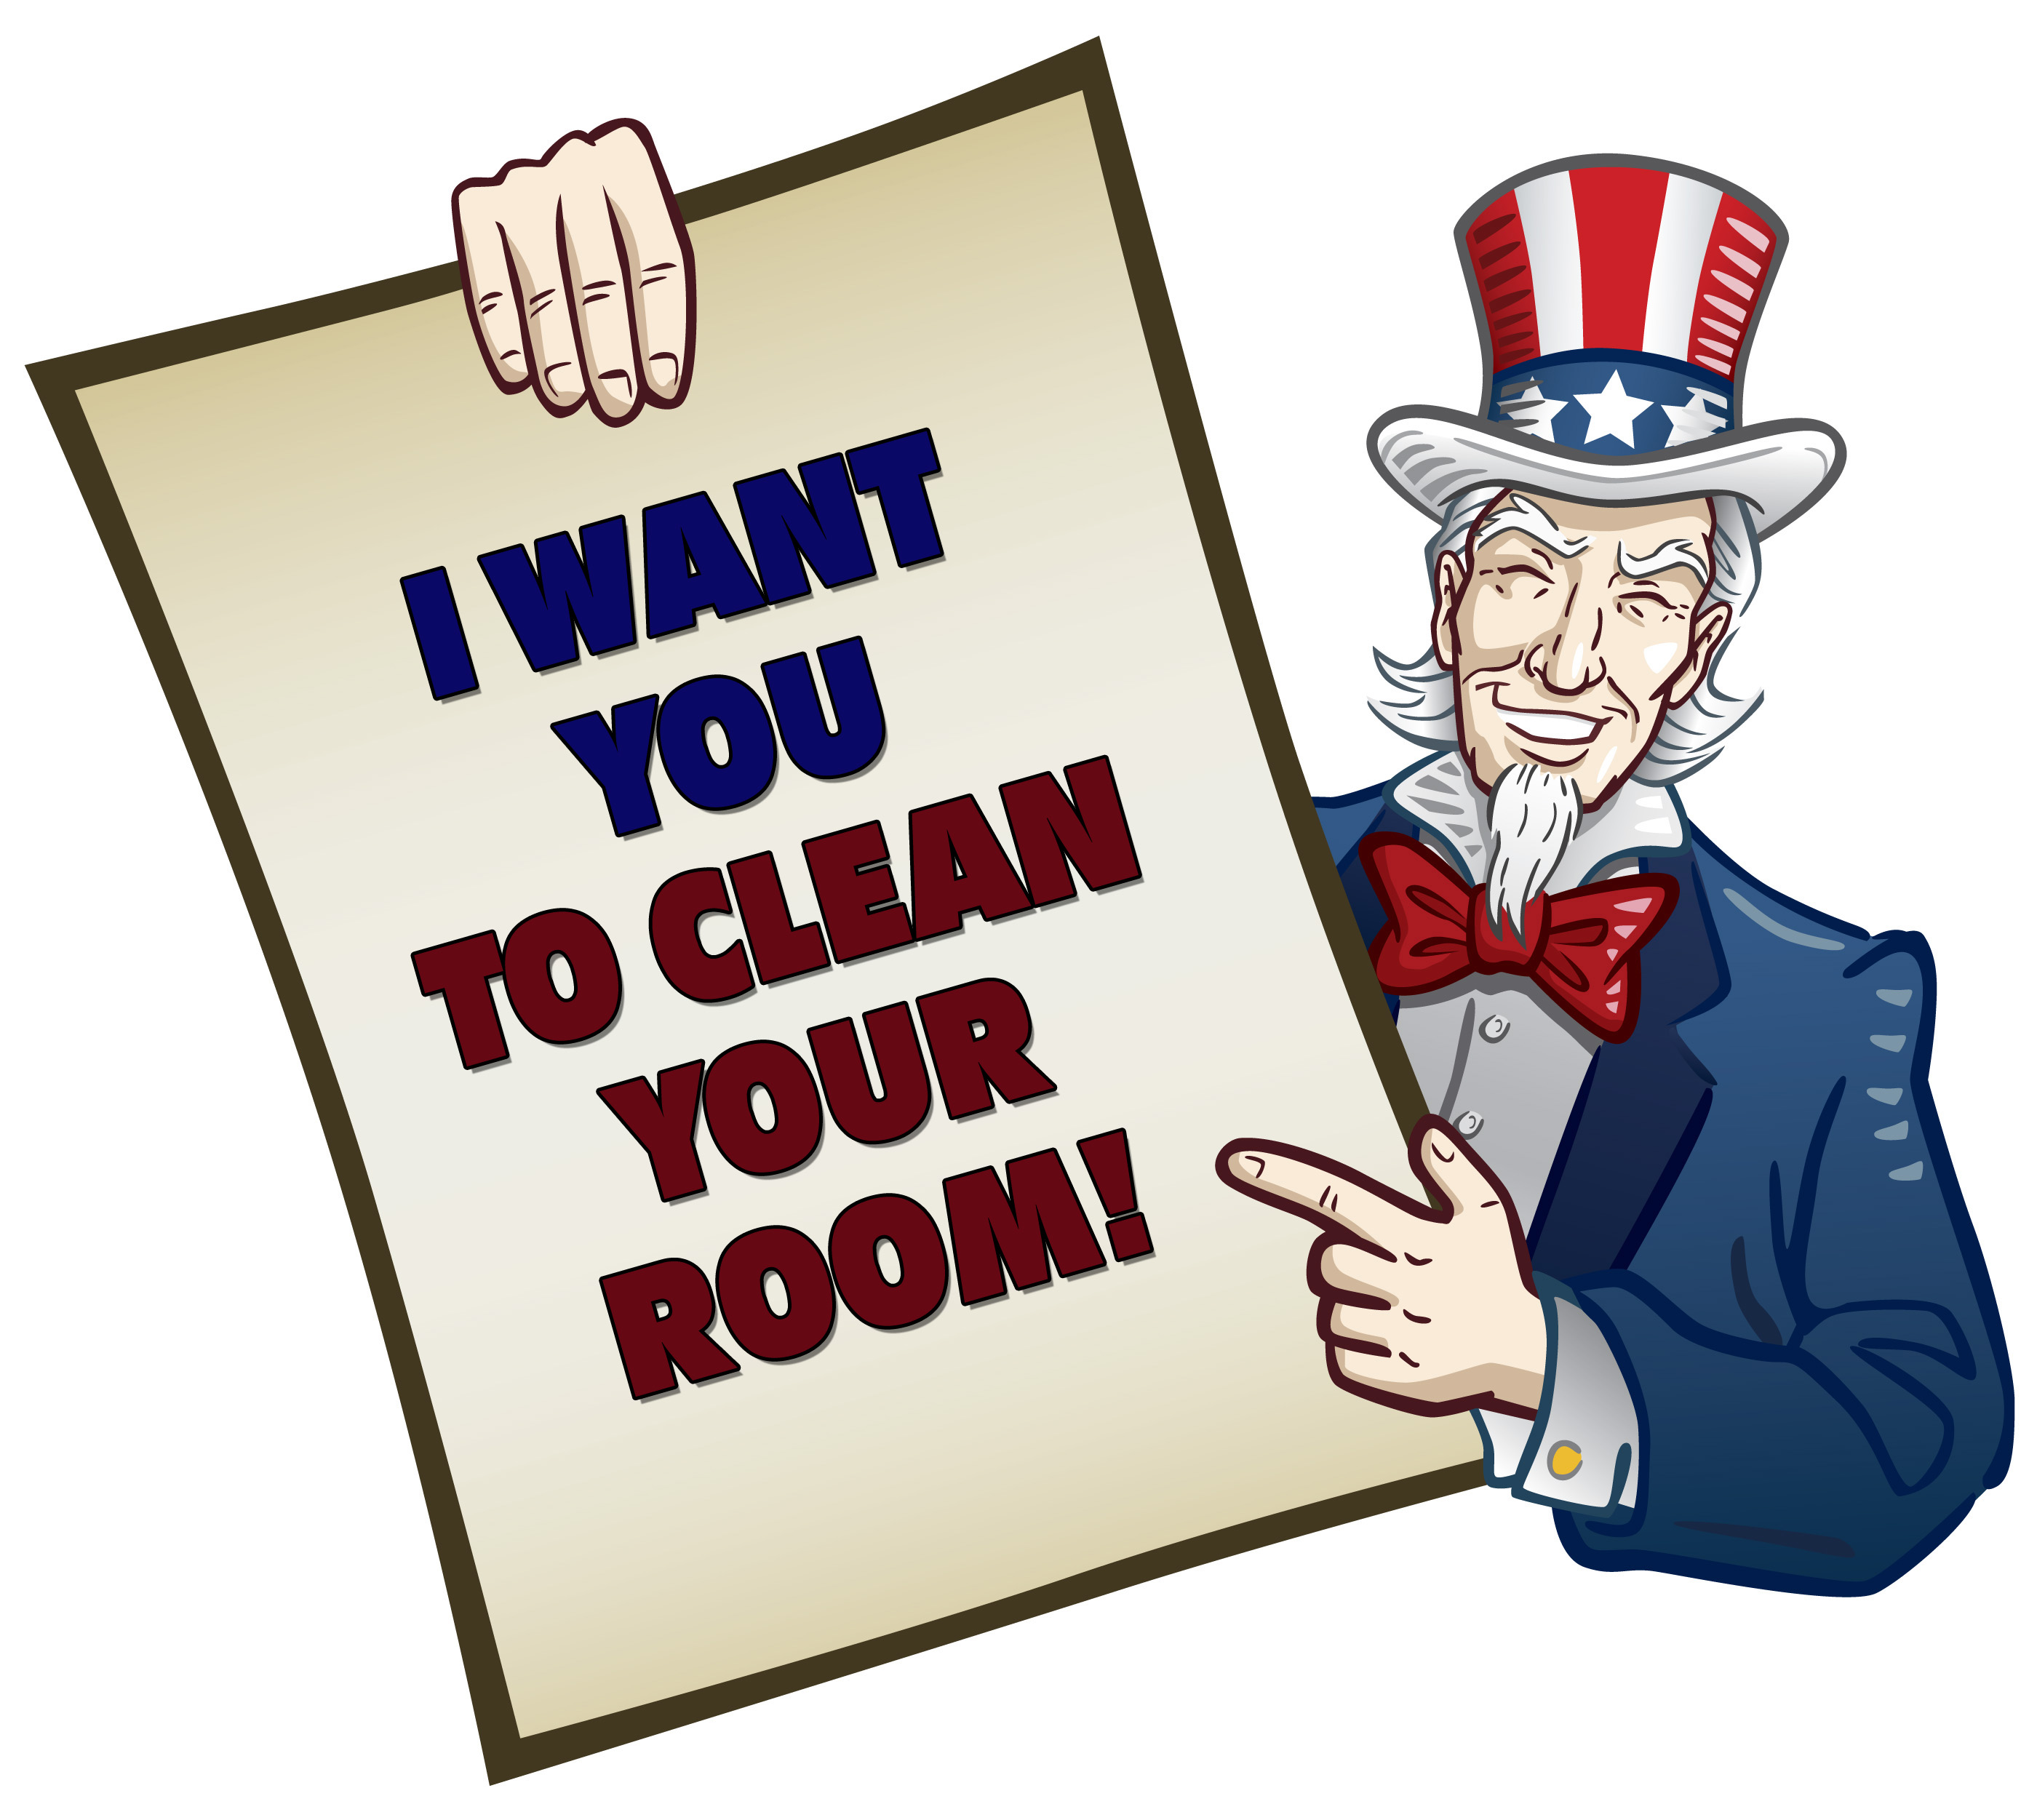 Image Of Uncle Sam - ClipArt Best